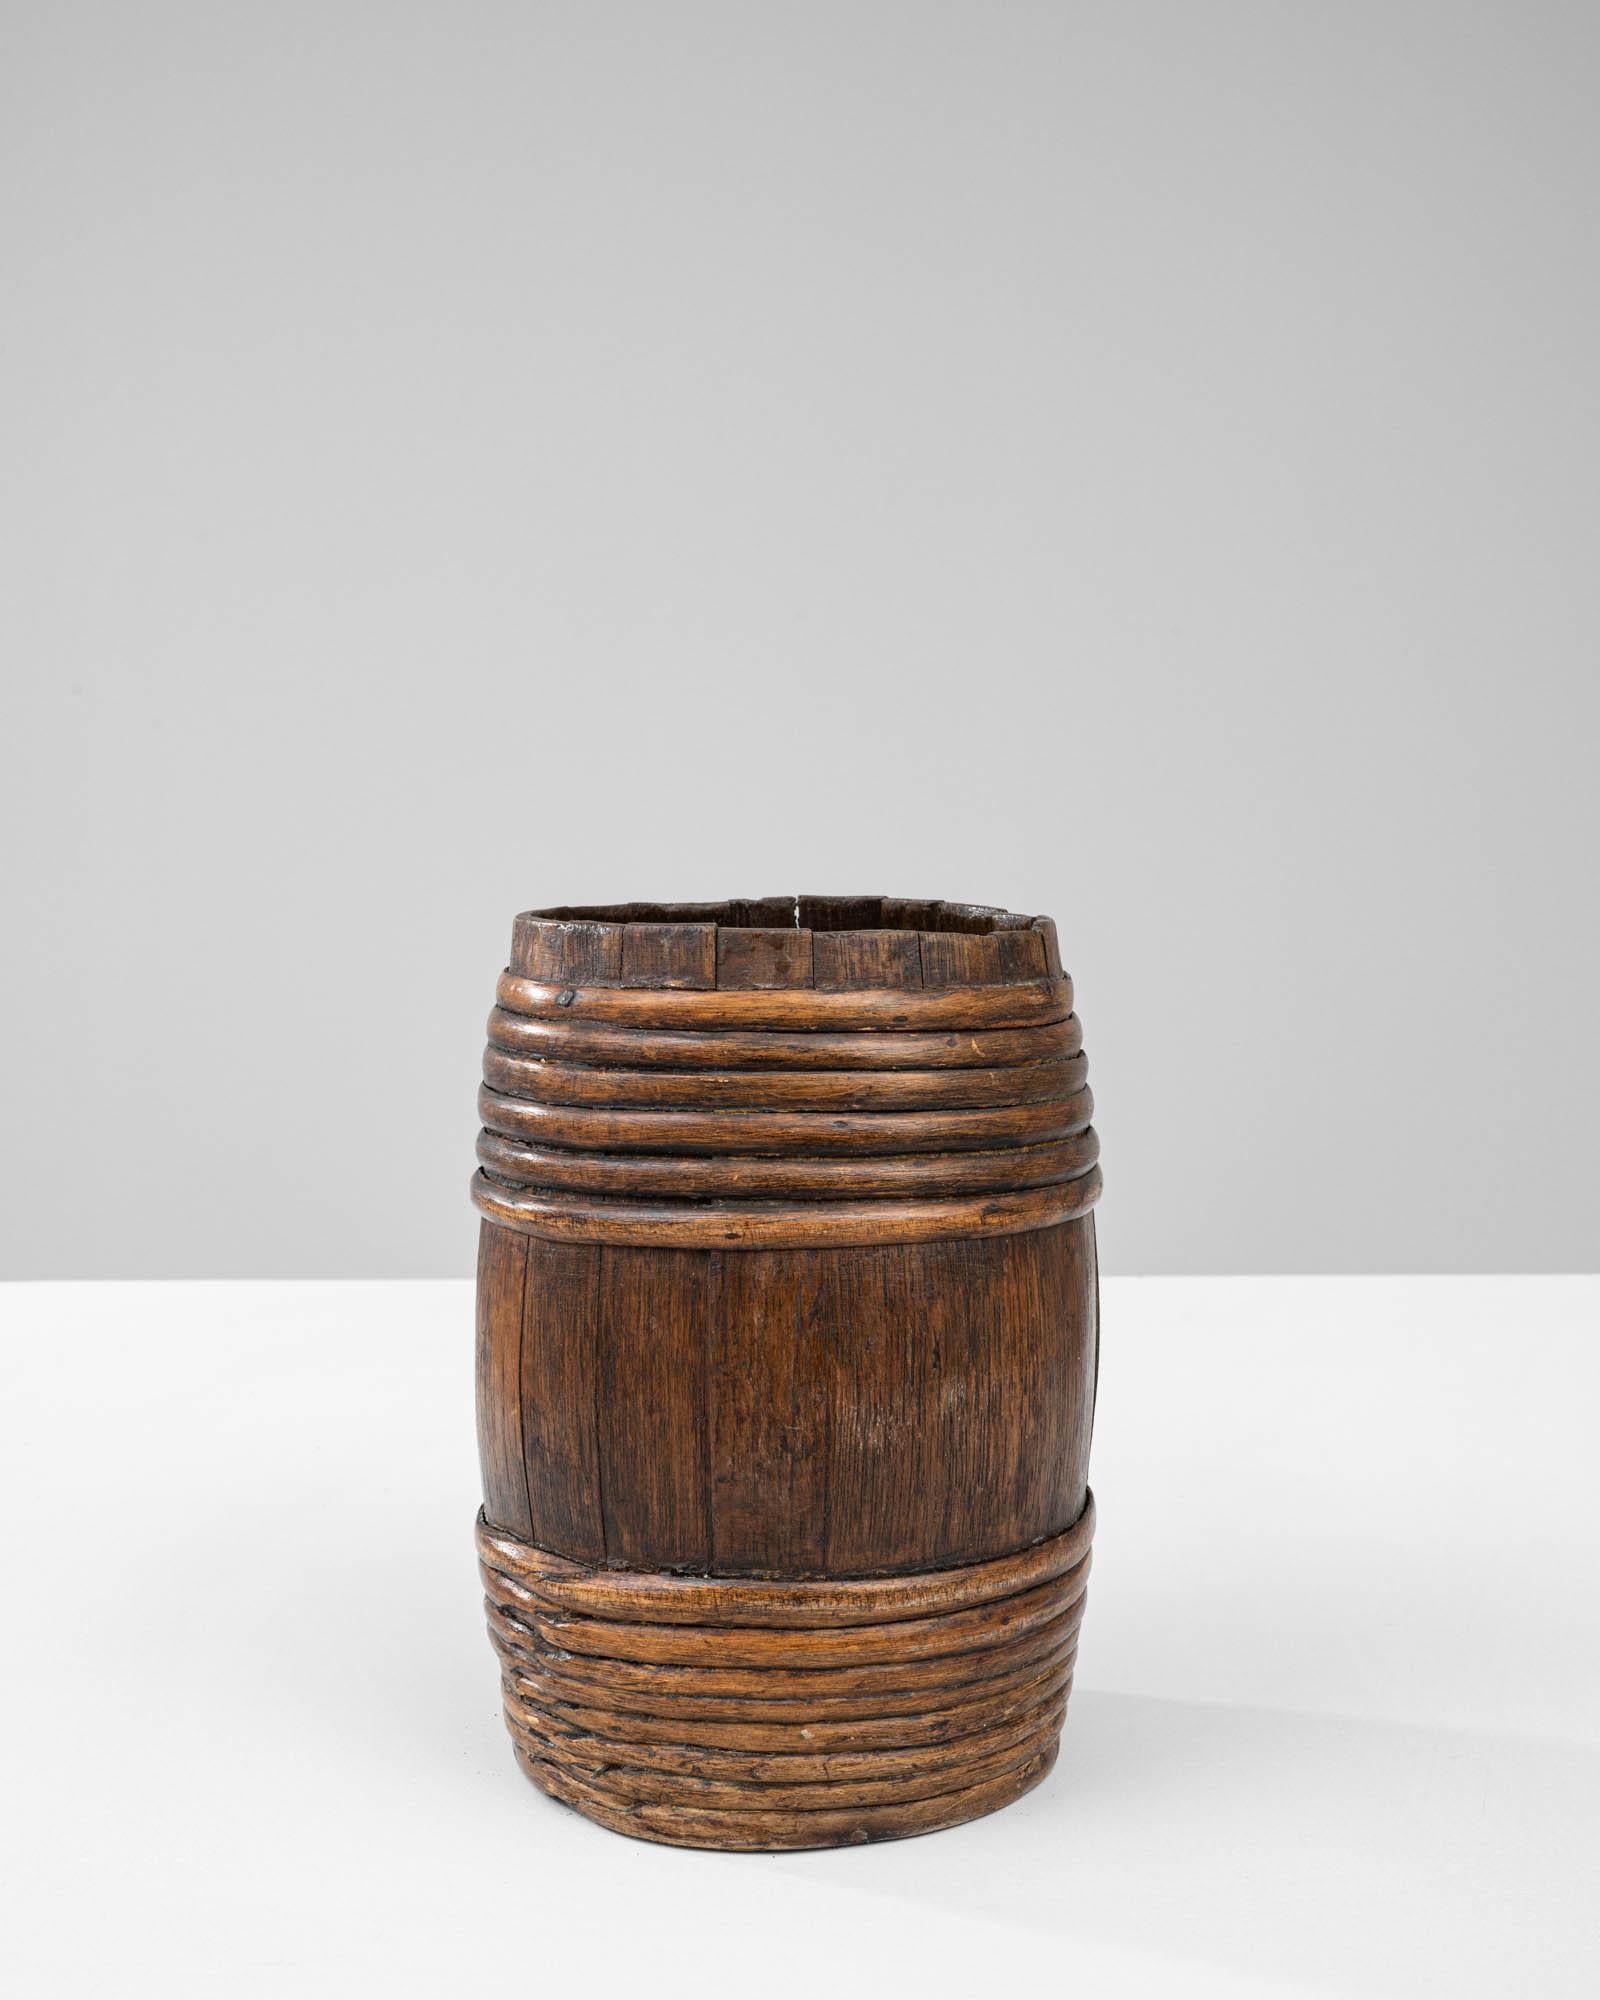 19th Century French Wooden Barrel In Good Condition For Sale In High Point, NC